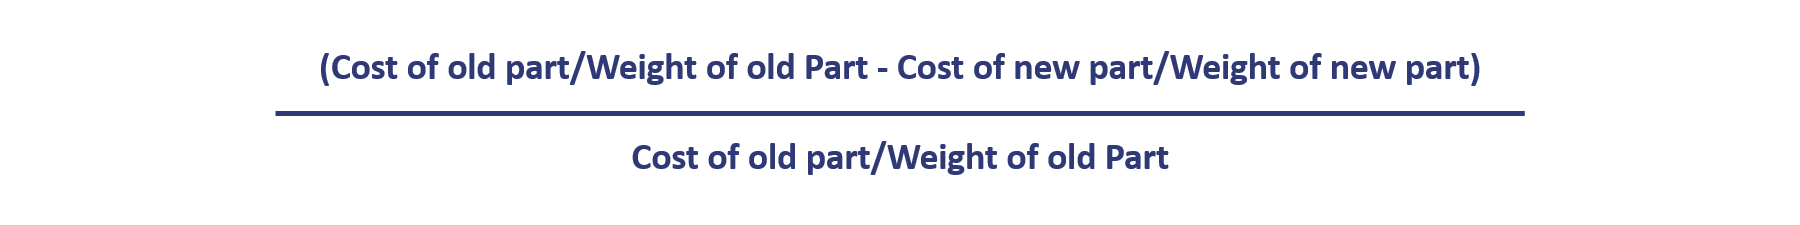 calculates cost of old part vs cost of new part